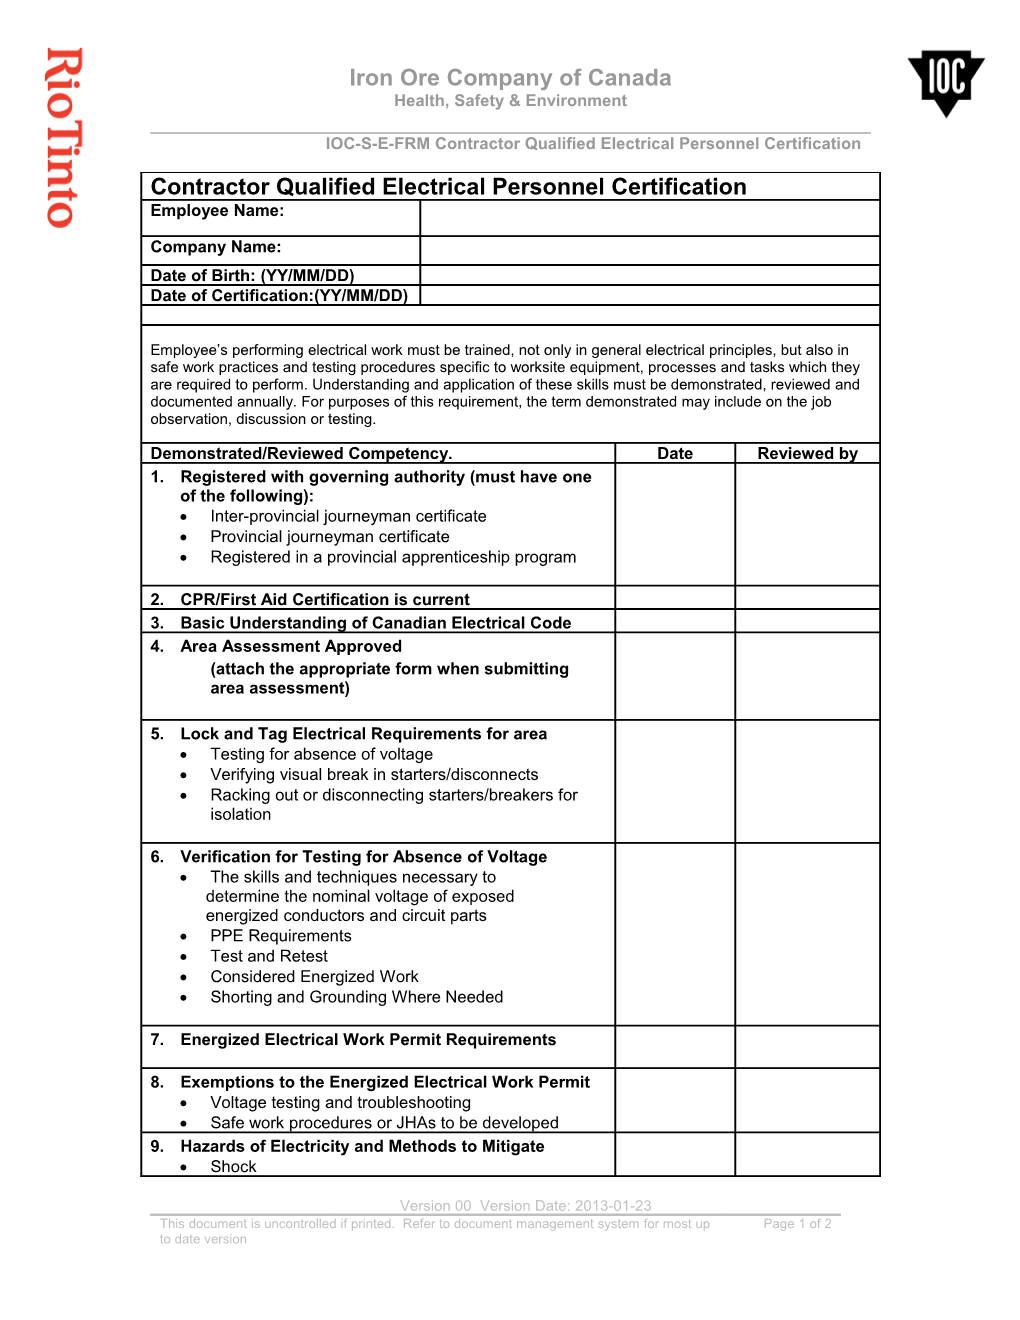 Qualified Electrical Personnel Certification Checklist